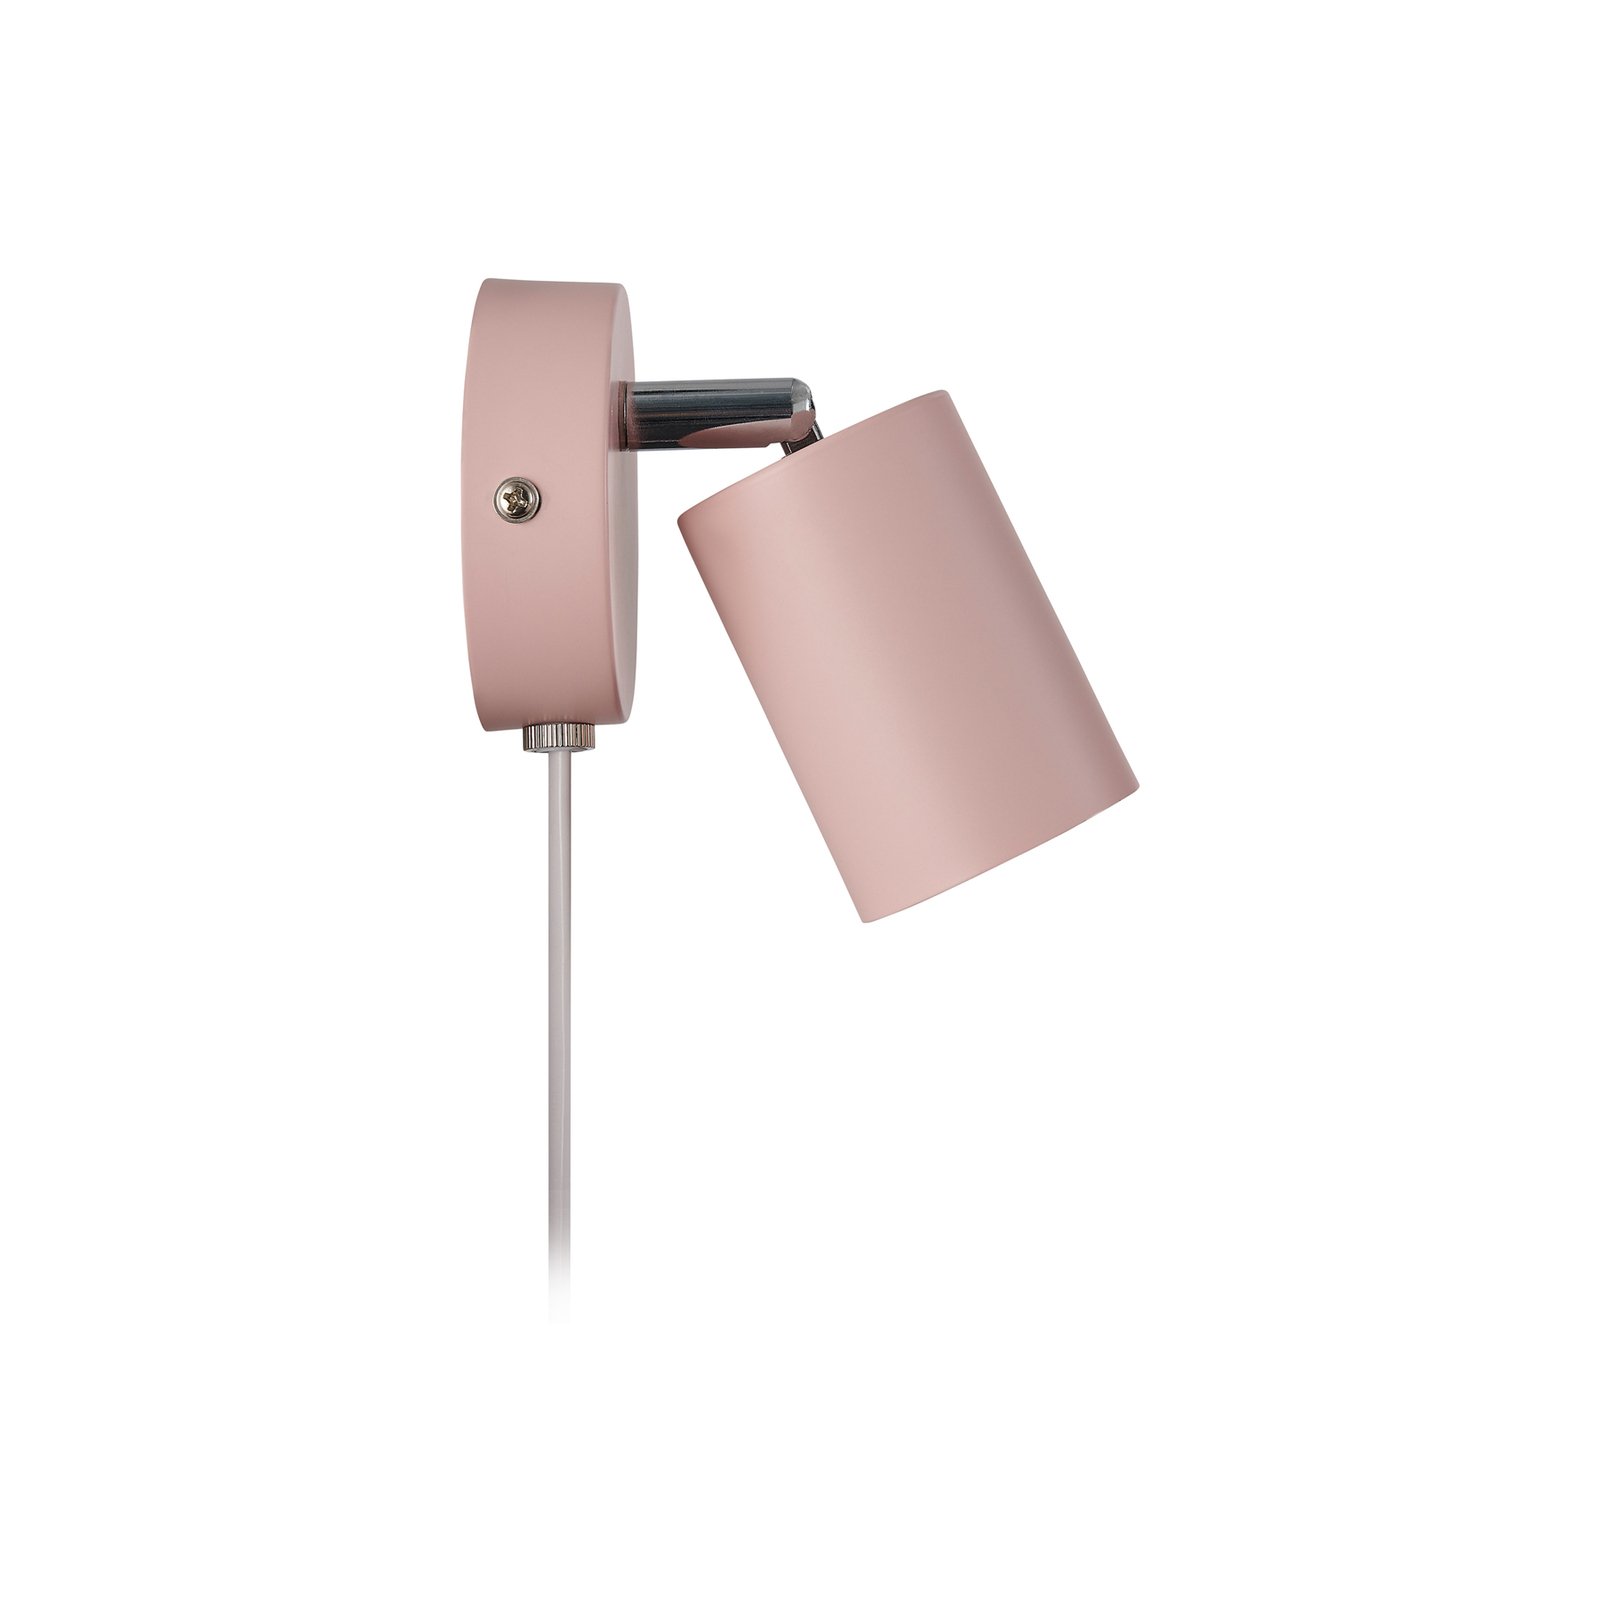 Explore wall spotlight with cable and plug, GU10, rosé